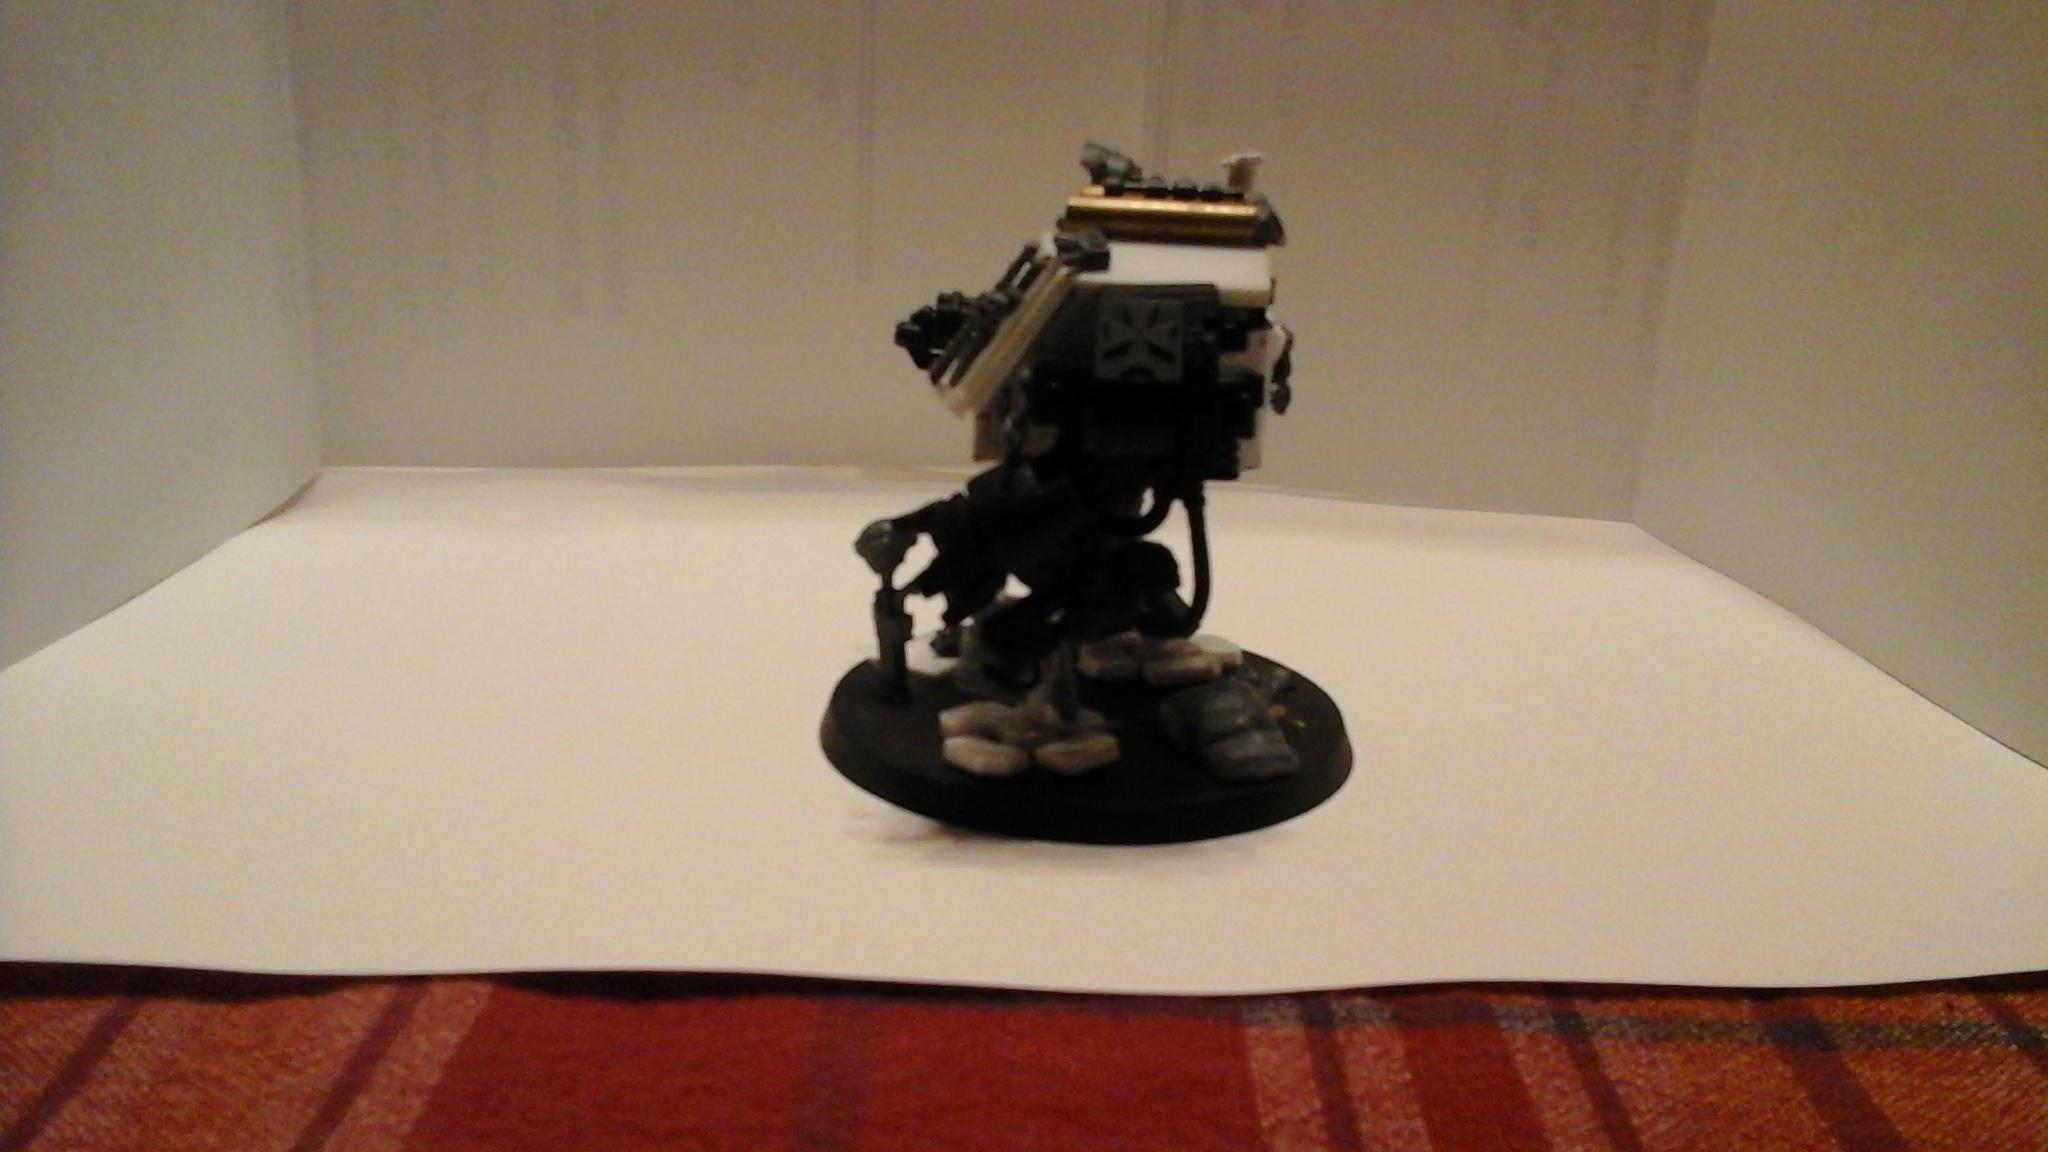 Dreadnought, Imperial Fists, Ironclad, Scratch Build, Space Marines, Warhammer 40,000